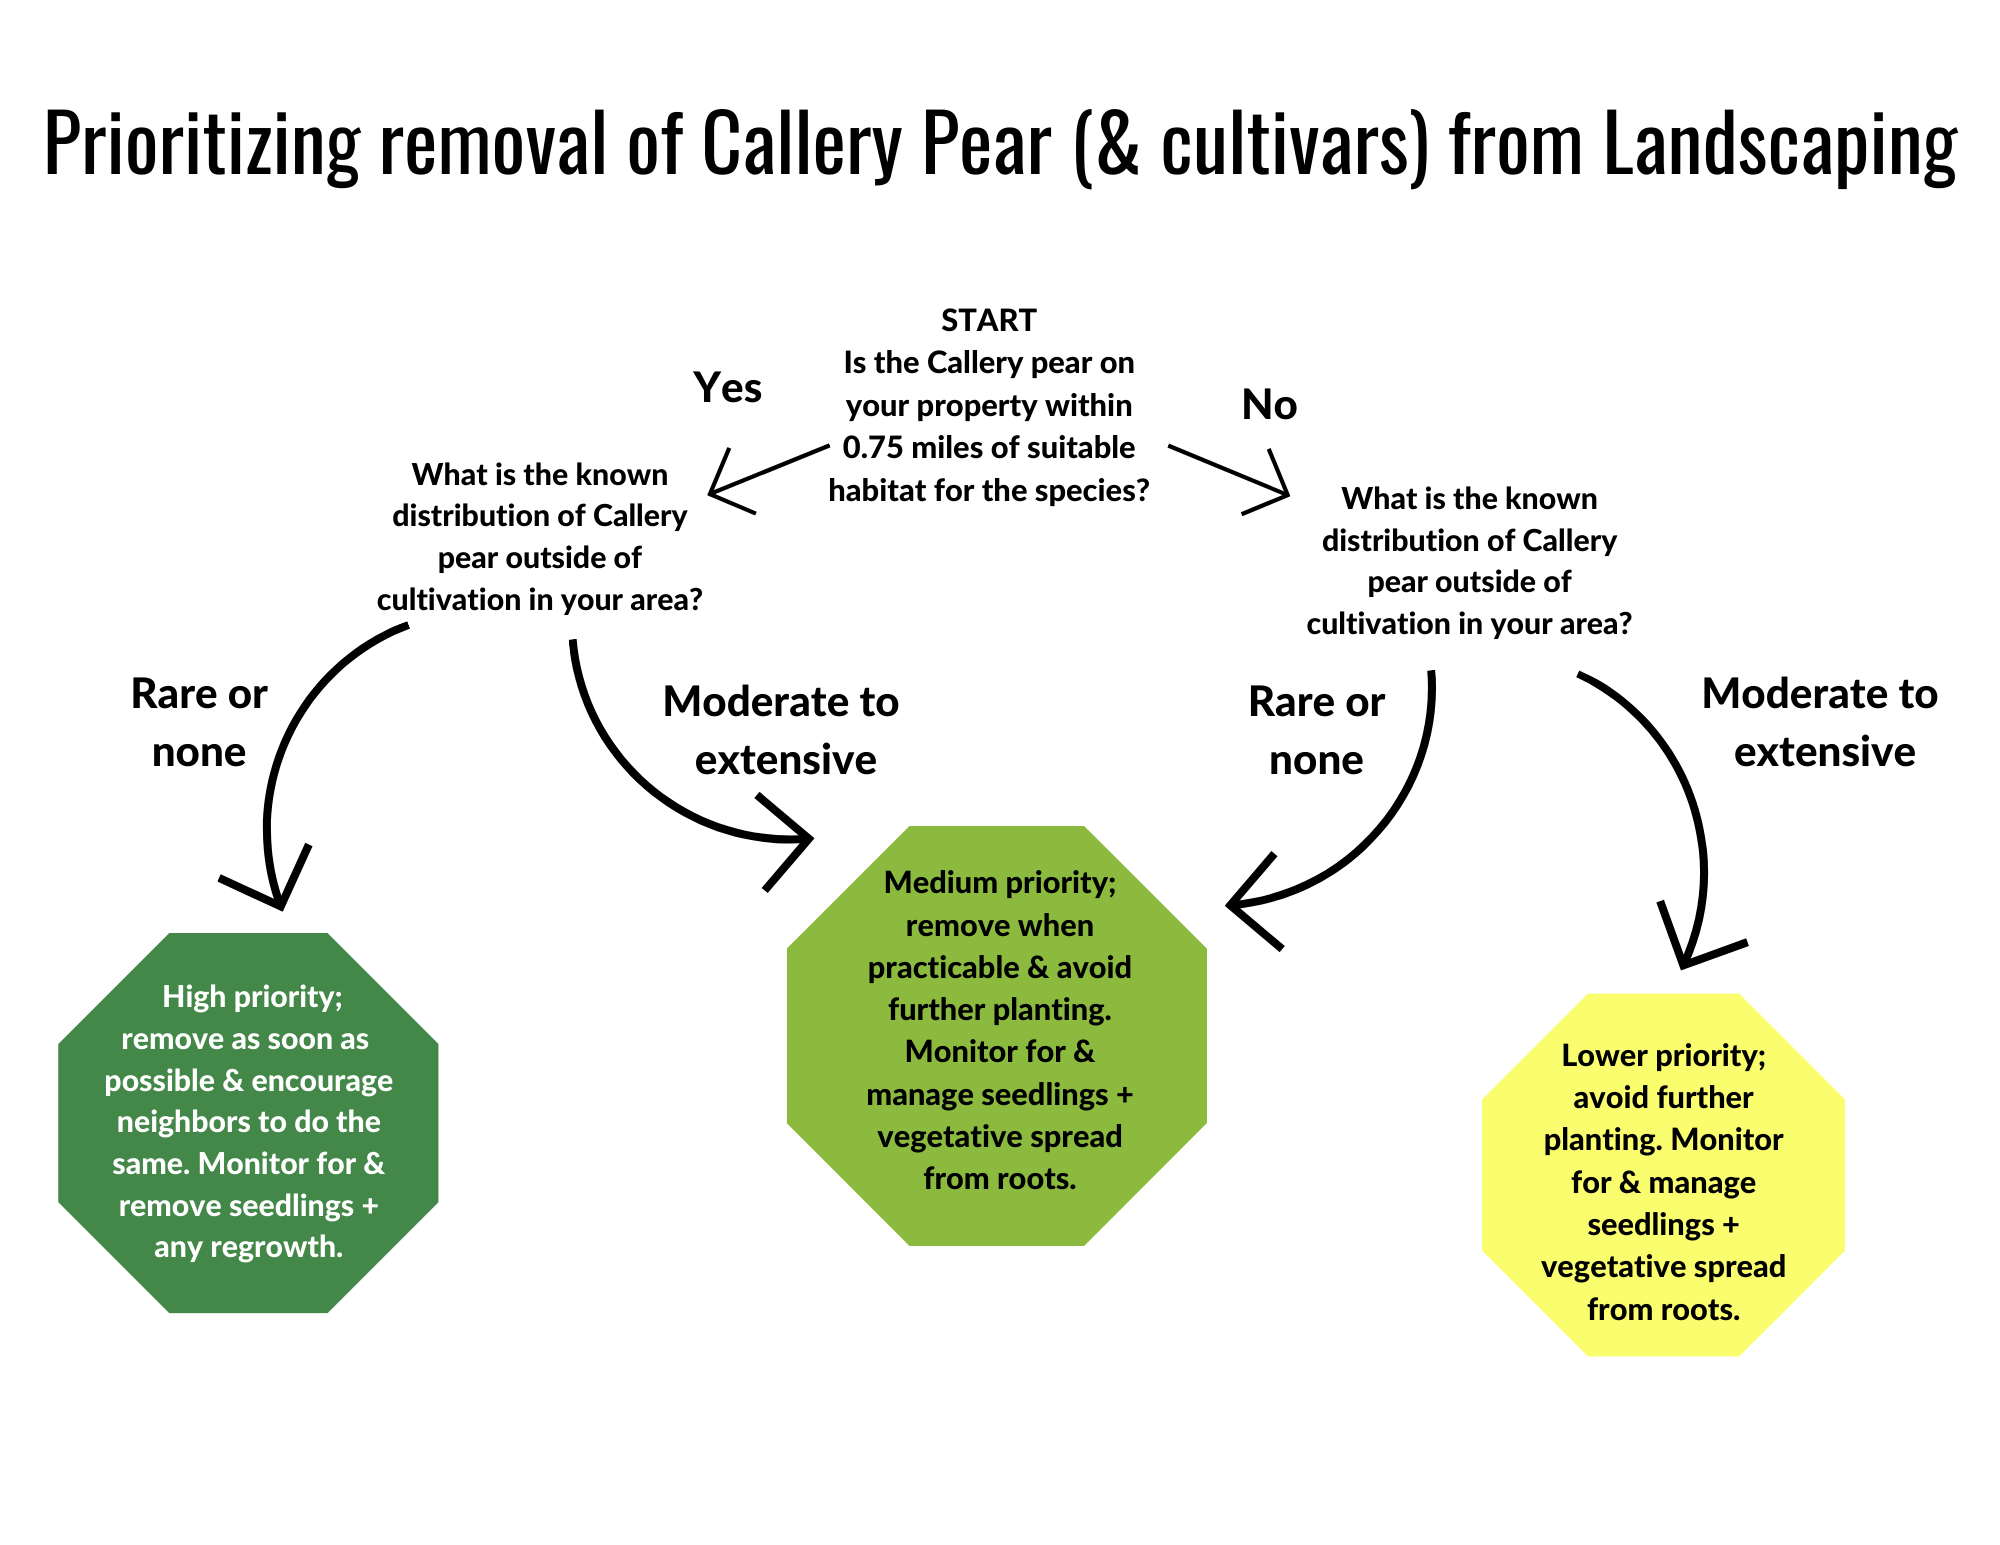 Callery pear removal decision tree